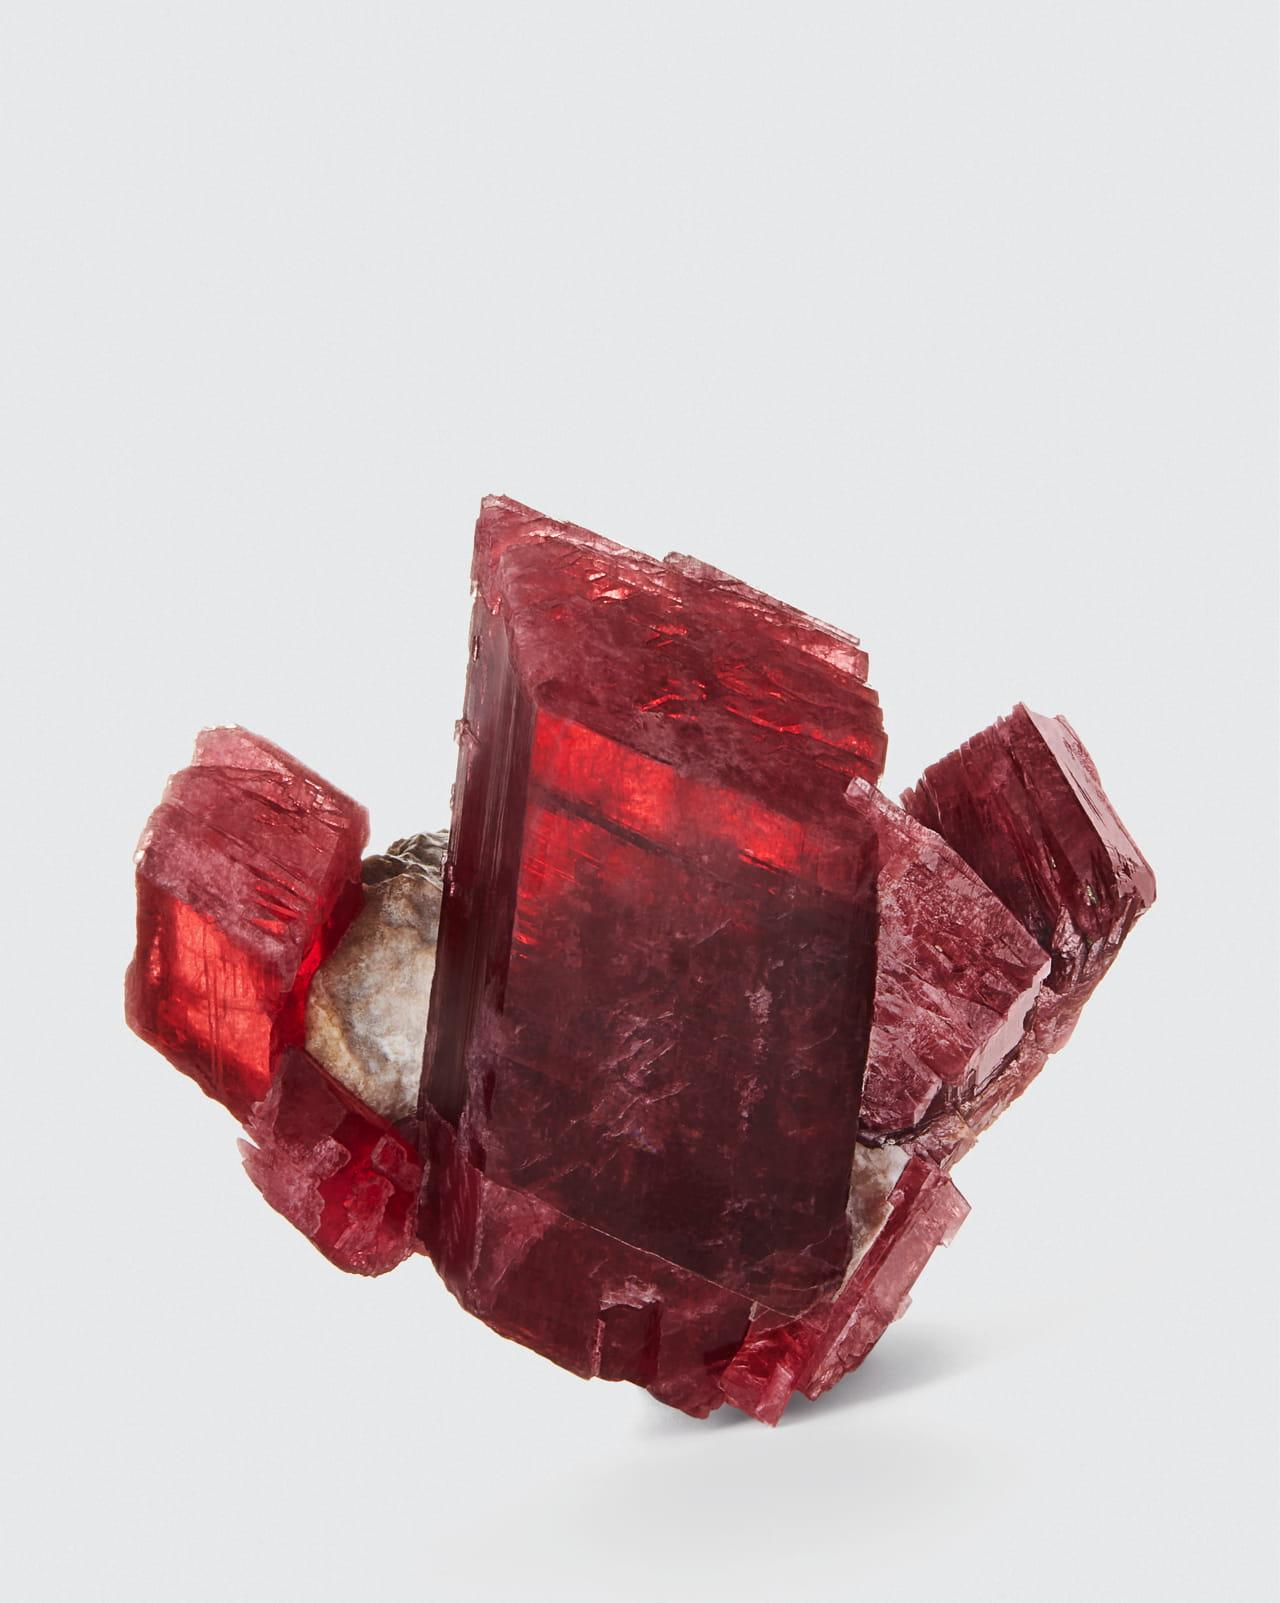 Rhodonite

Morro da Mina Mine, Conselheiro Lafaiete,
Minas Gerais, Brazil

5.8 cm tall x 7.3 cm wide

The most exceptional rhodonites in the world are now found in Brazil. They possess the rich ruby red color in large transparent crystals.